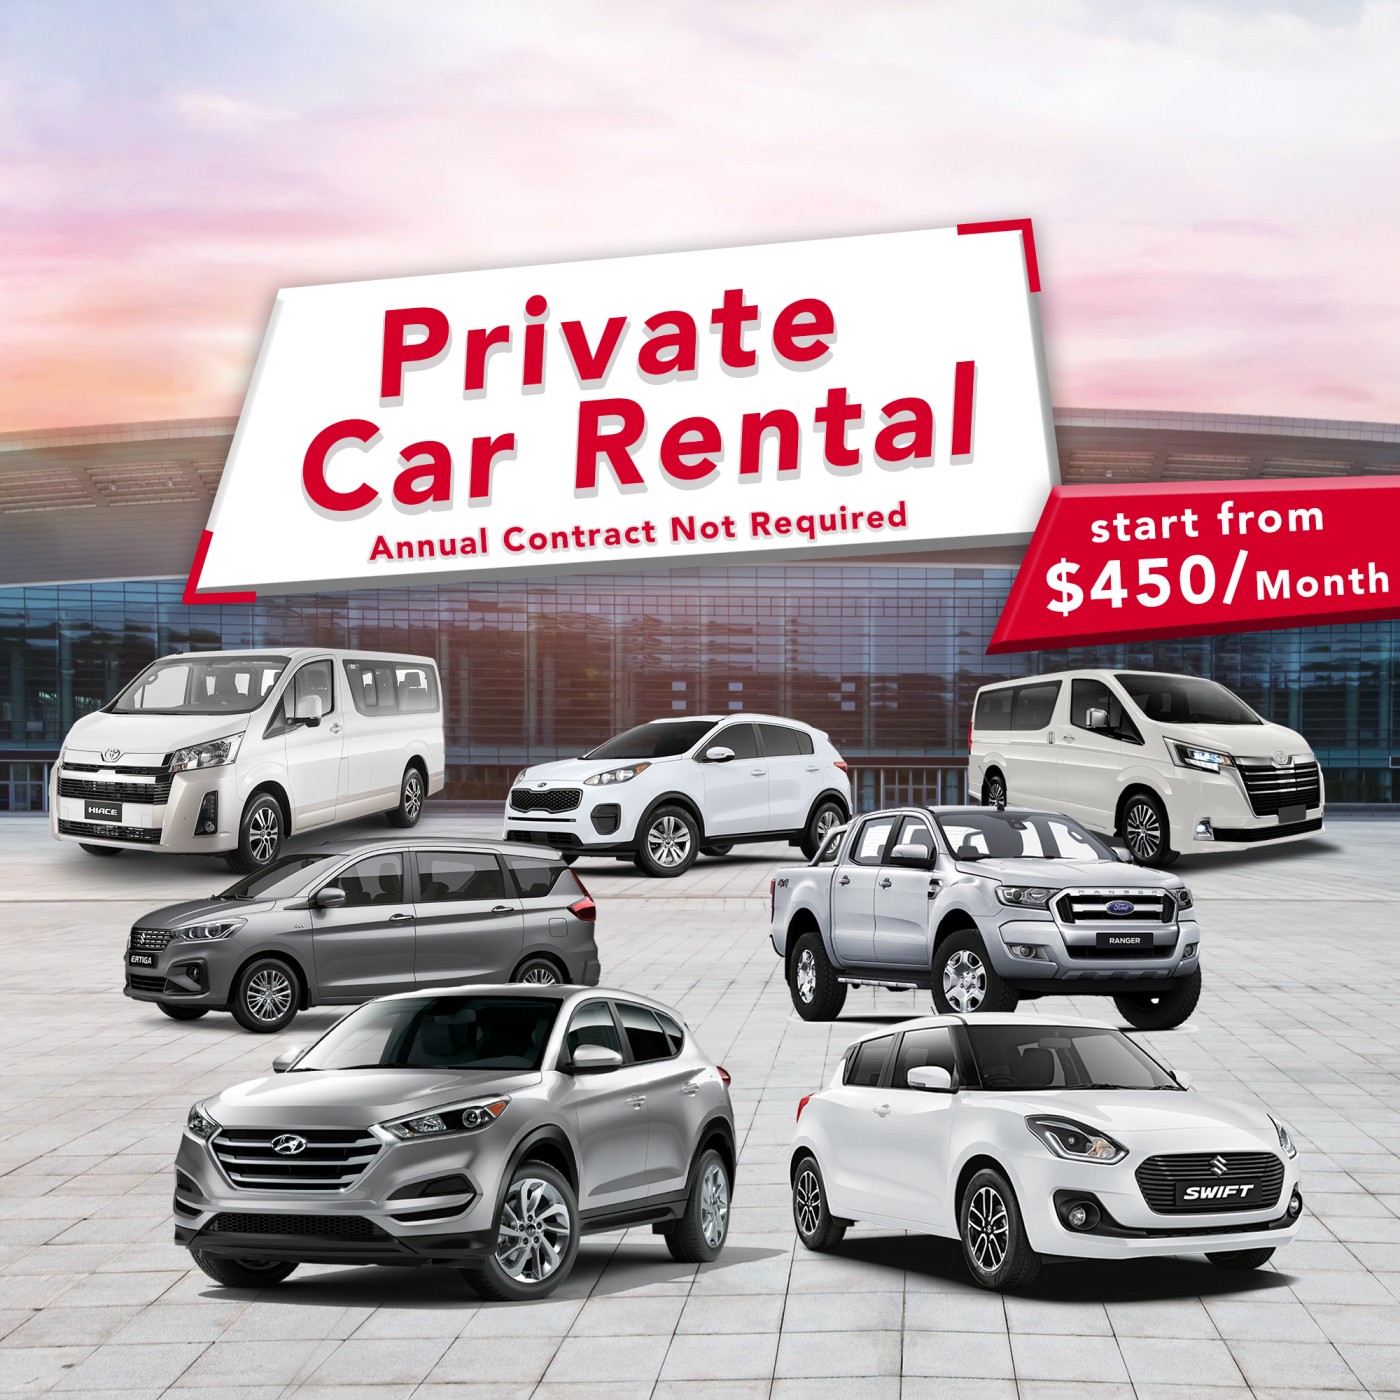 Car hire offers from Avis